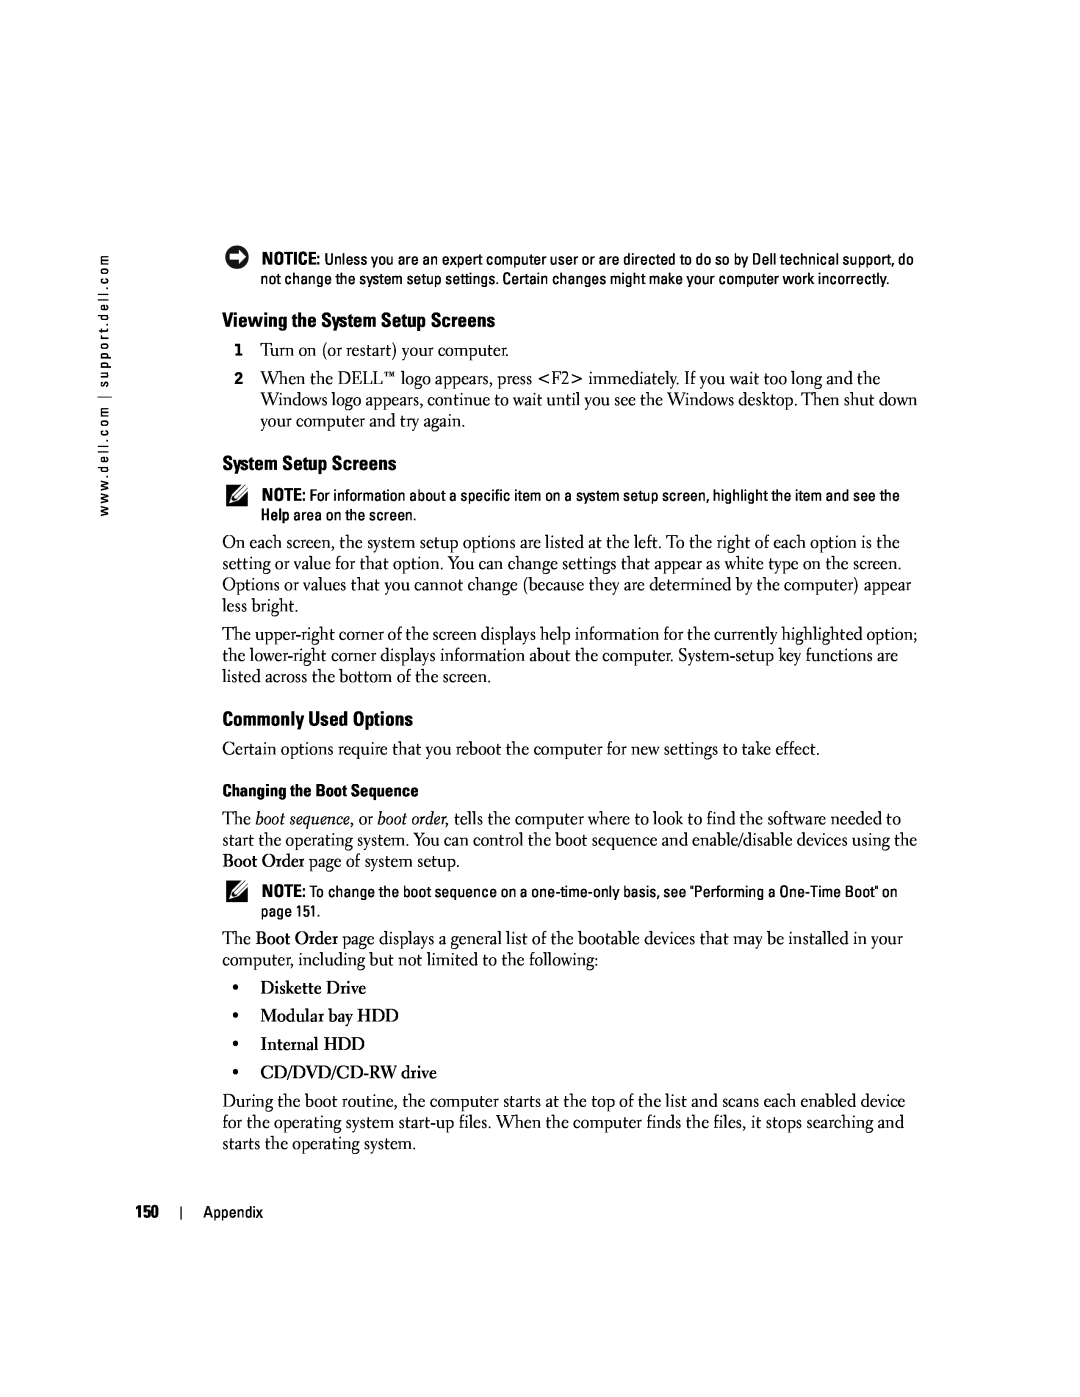 Dell PP09L owner manual Viewing the System Setup Screens, Commonly Used Options 